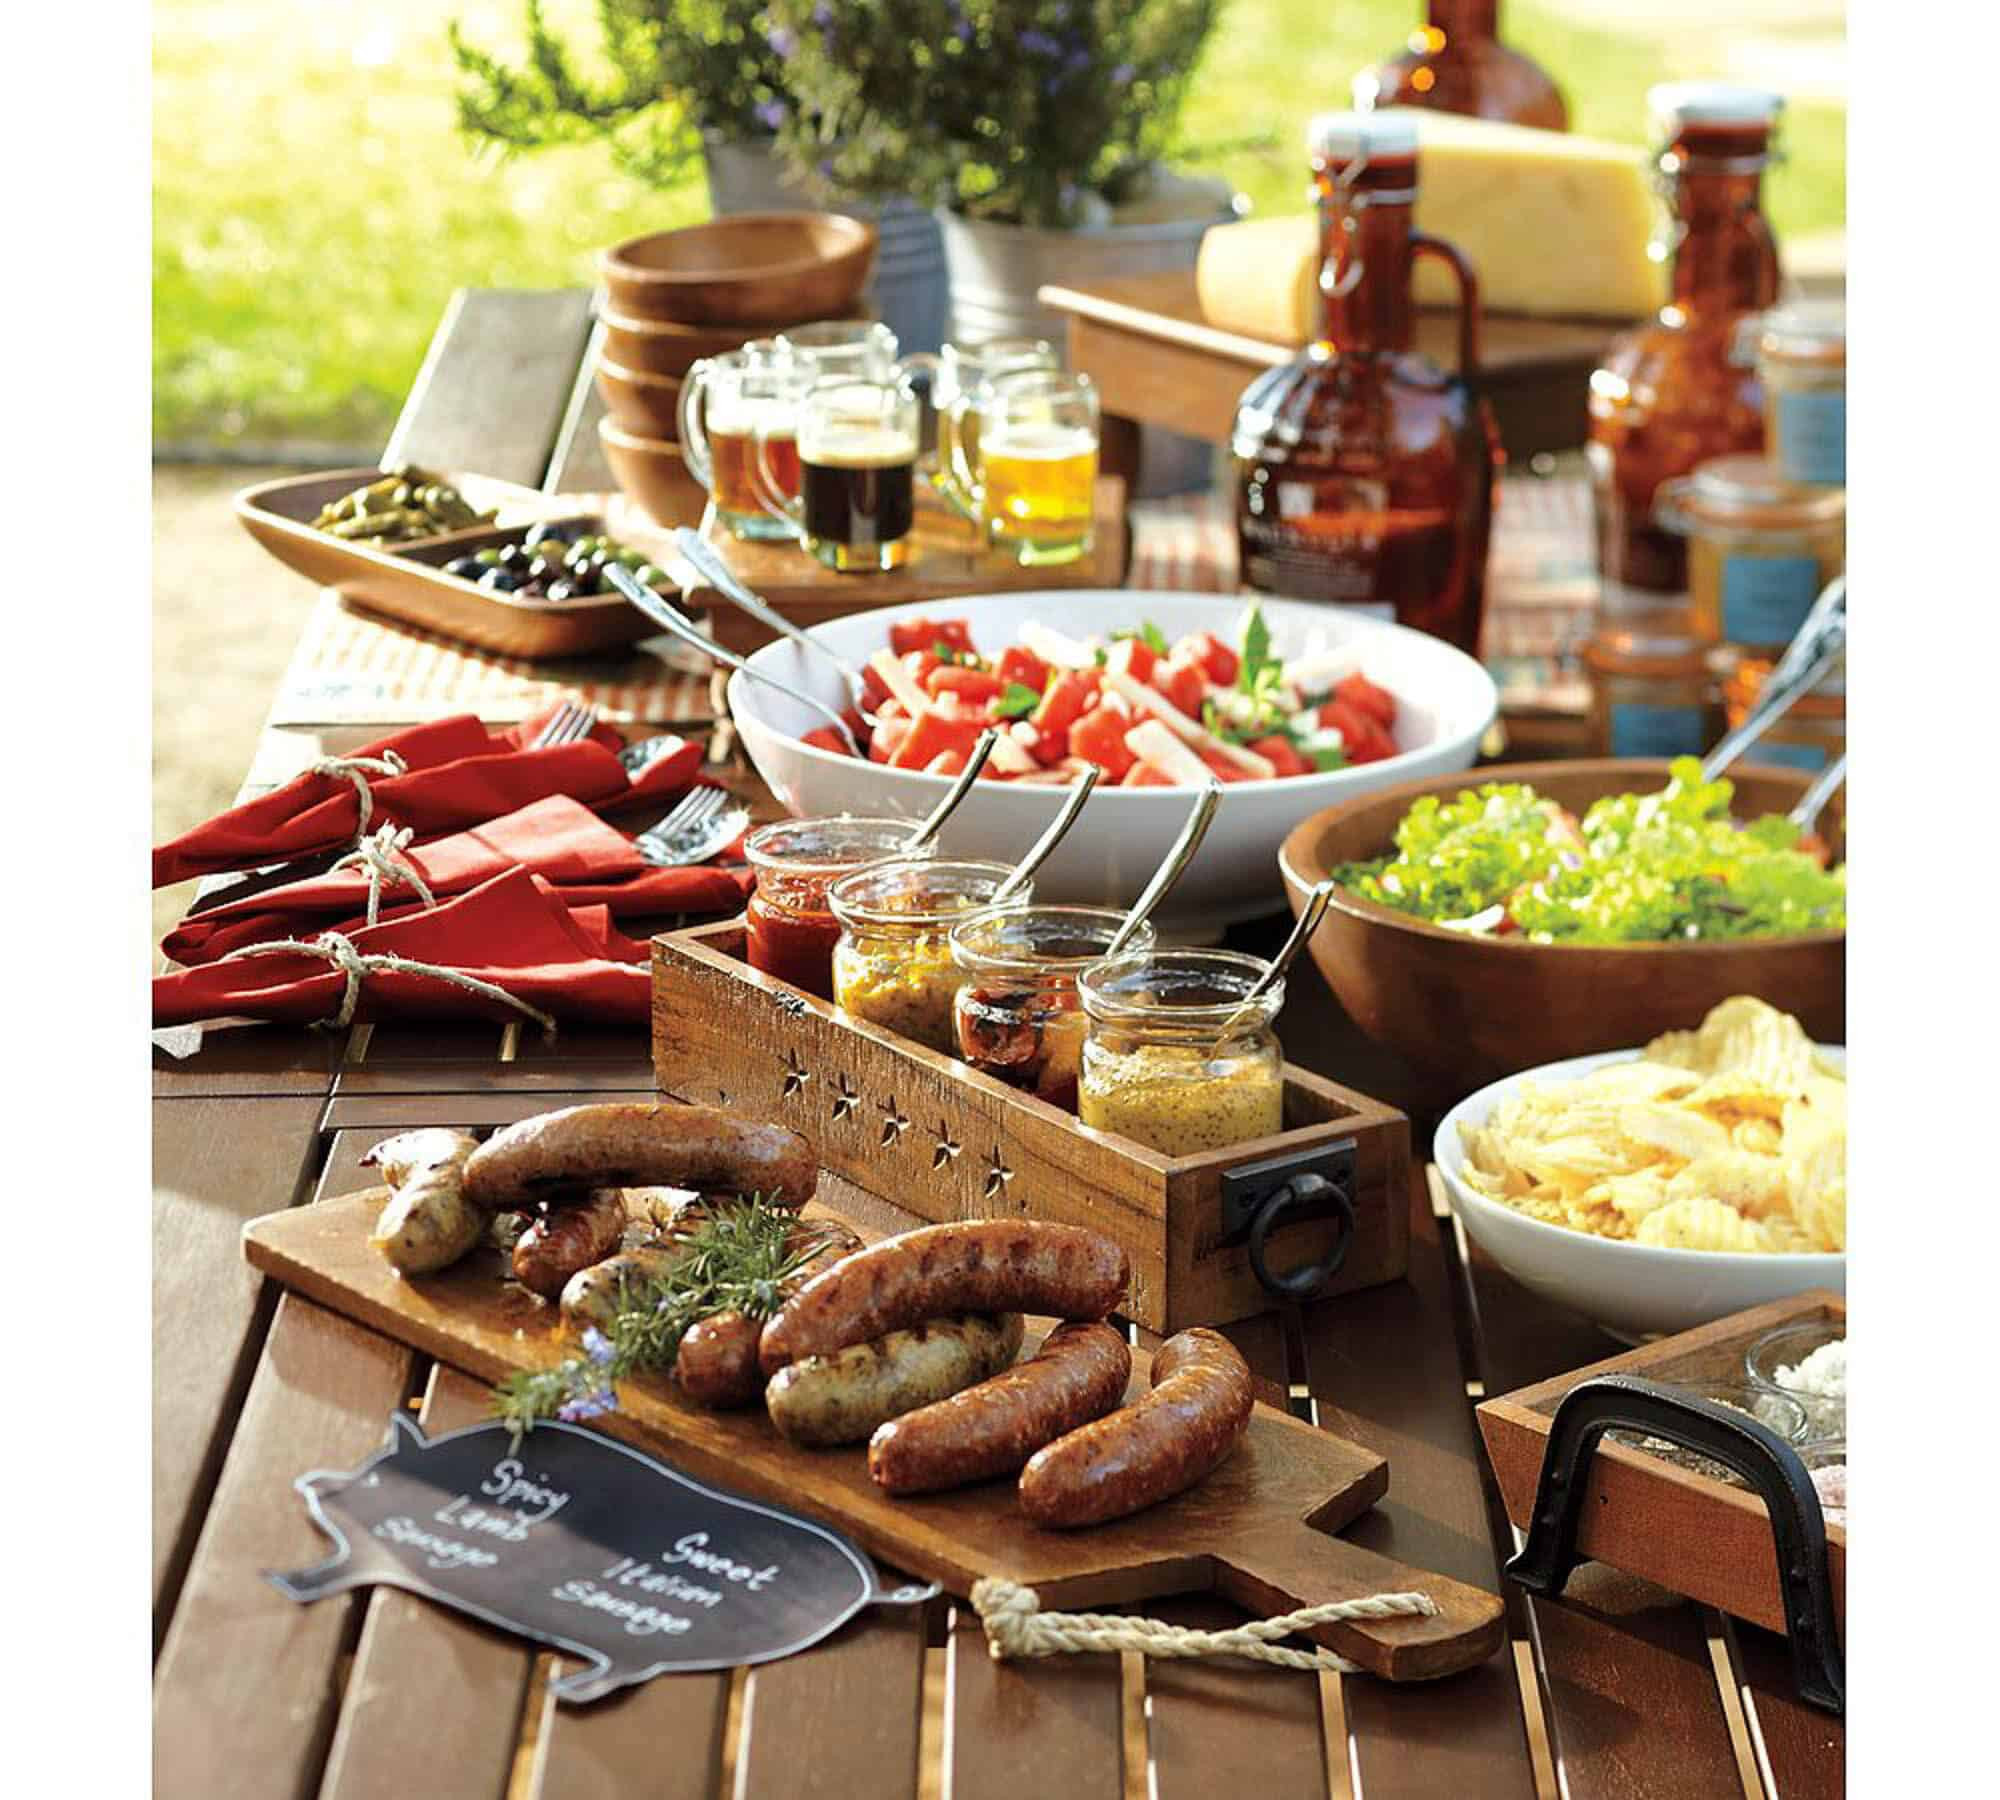 Backyard Barbecue Party Ideas
 How to Host a Backyard Party & BBQ — Gentleman s Gazette